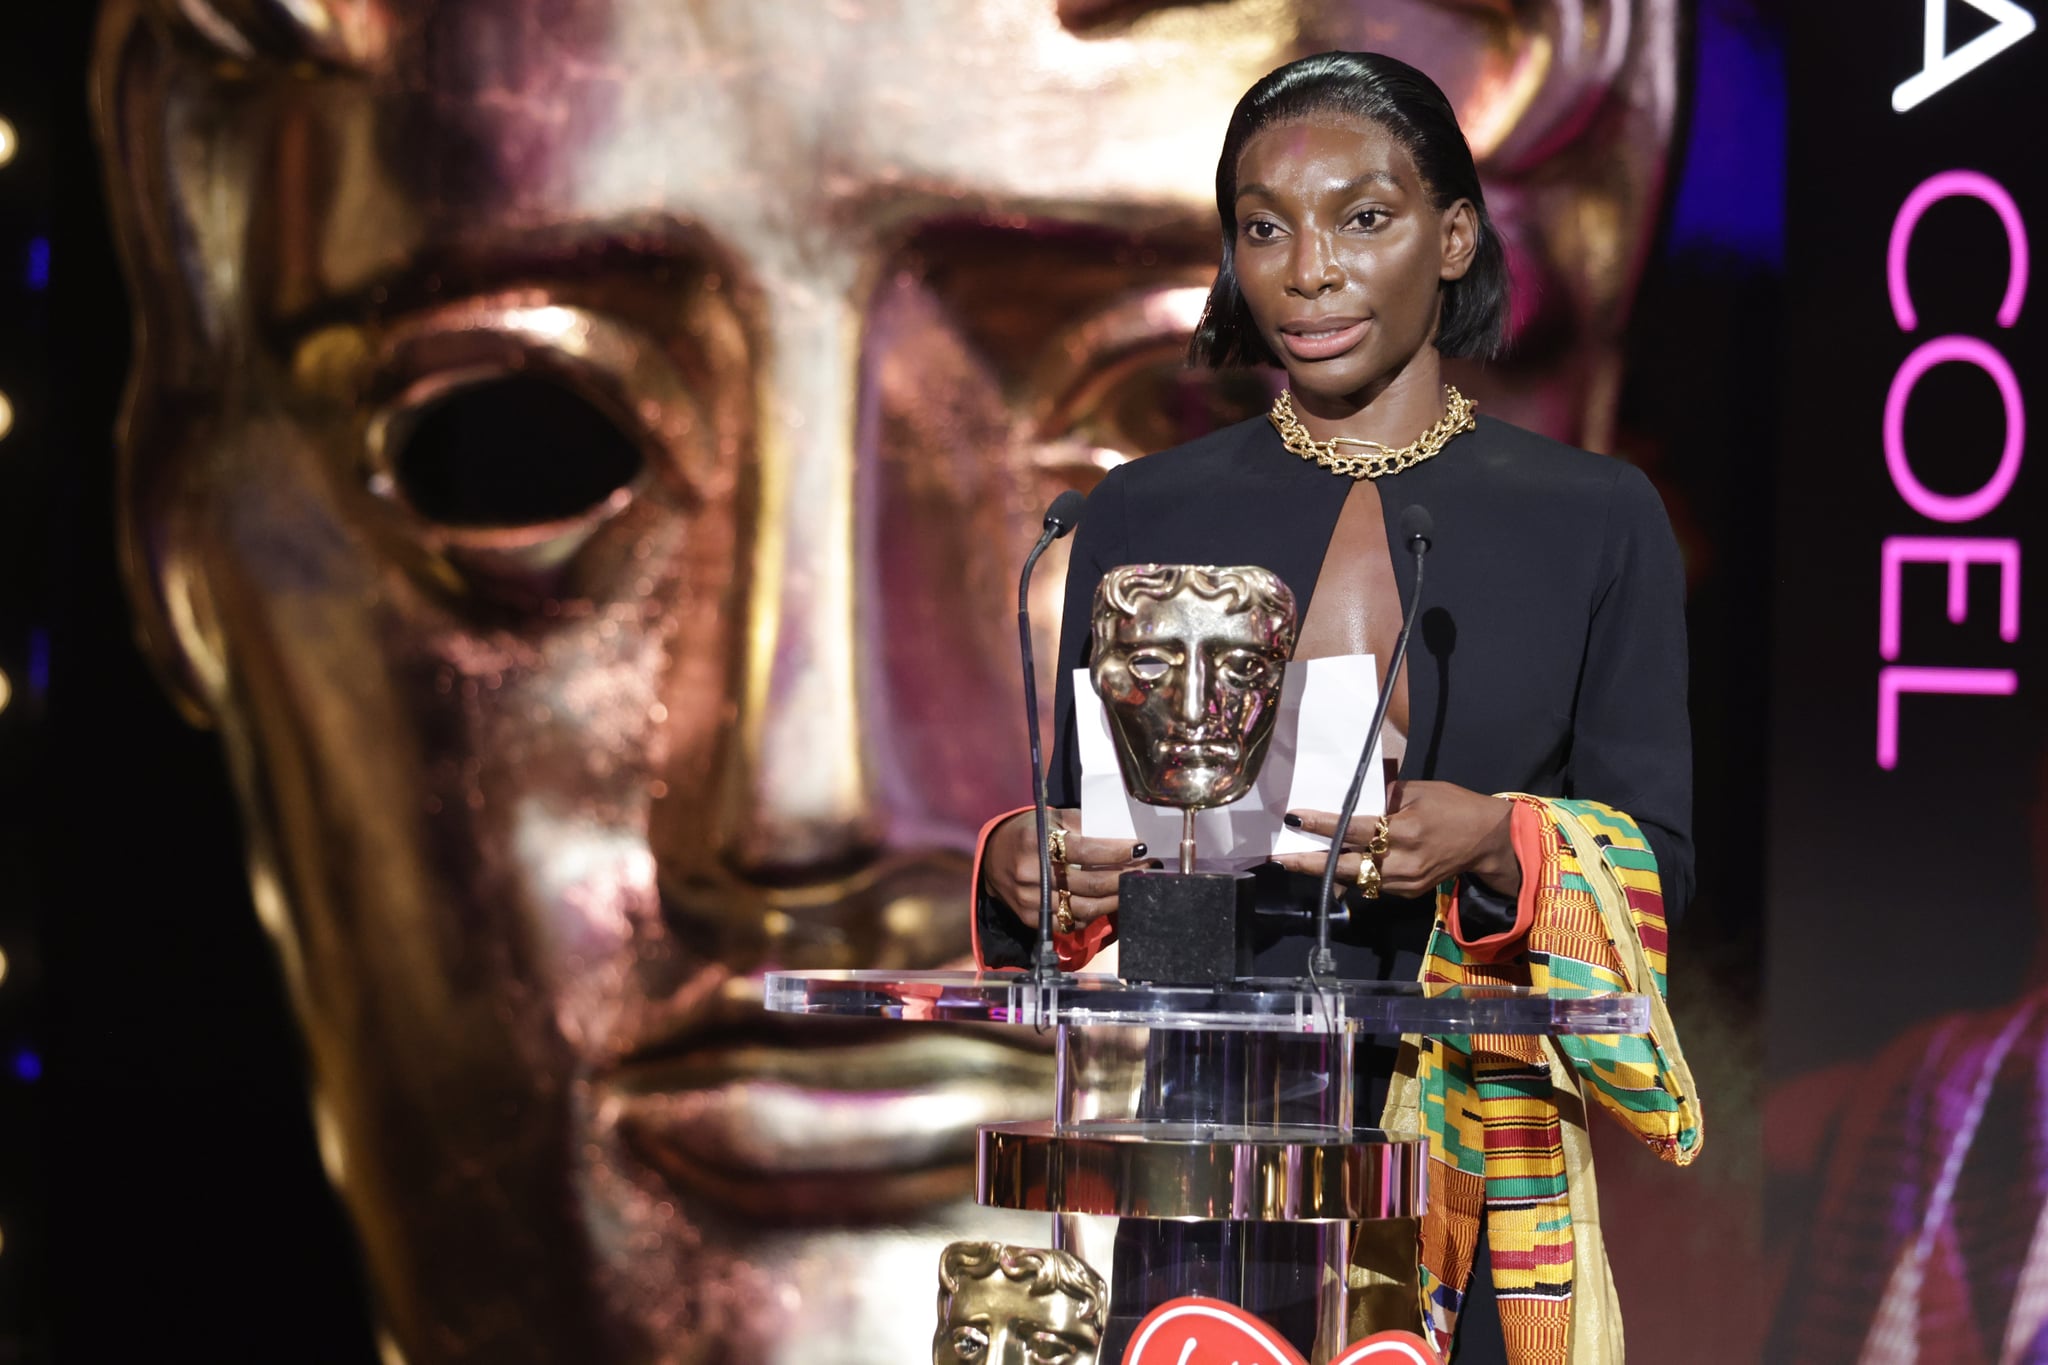 EXCLUSIVEMandatory Credit: Photo by Guy Levy/Shutterstock for BAFTA (12021062ih)Leading Actress - Michaela Coel - I May Destroy YouEXCLUSIVE - Virgin Media British Academy Television Awards, Ceremony, London, UK - 06 Jun 2021